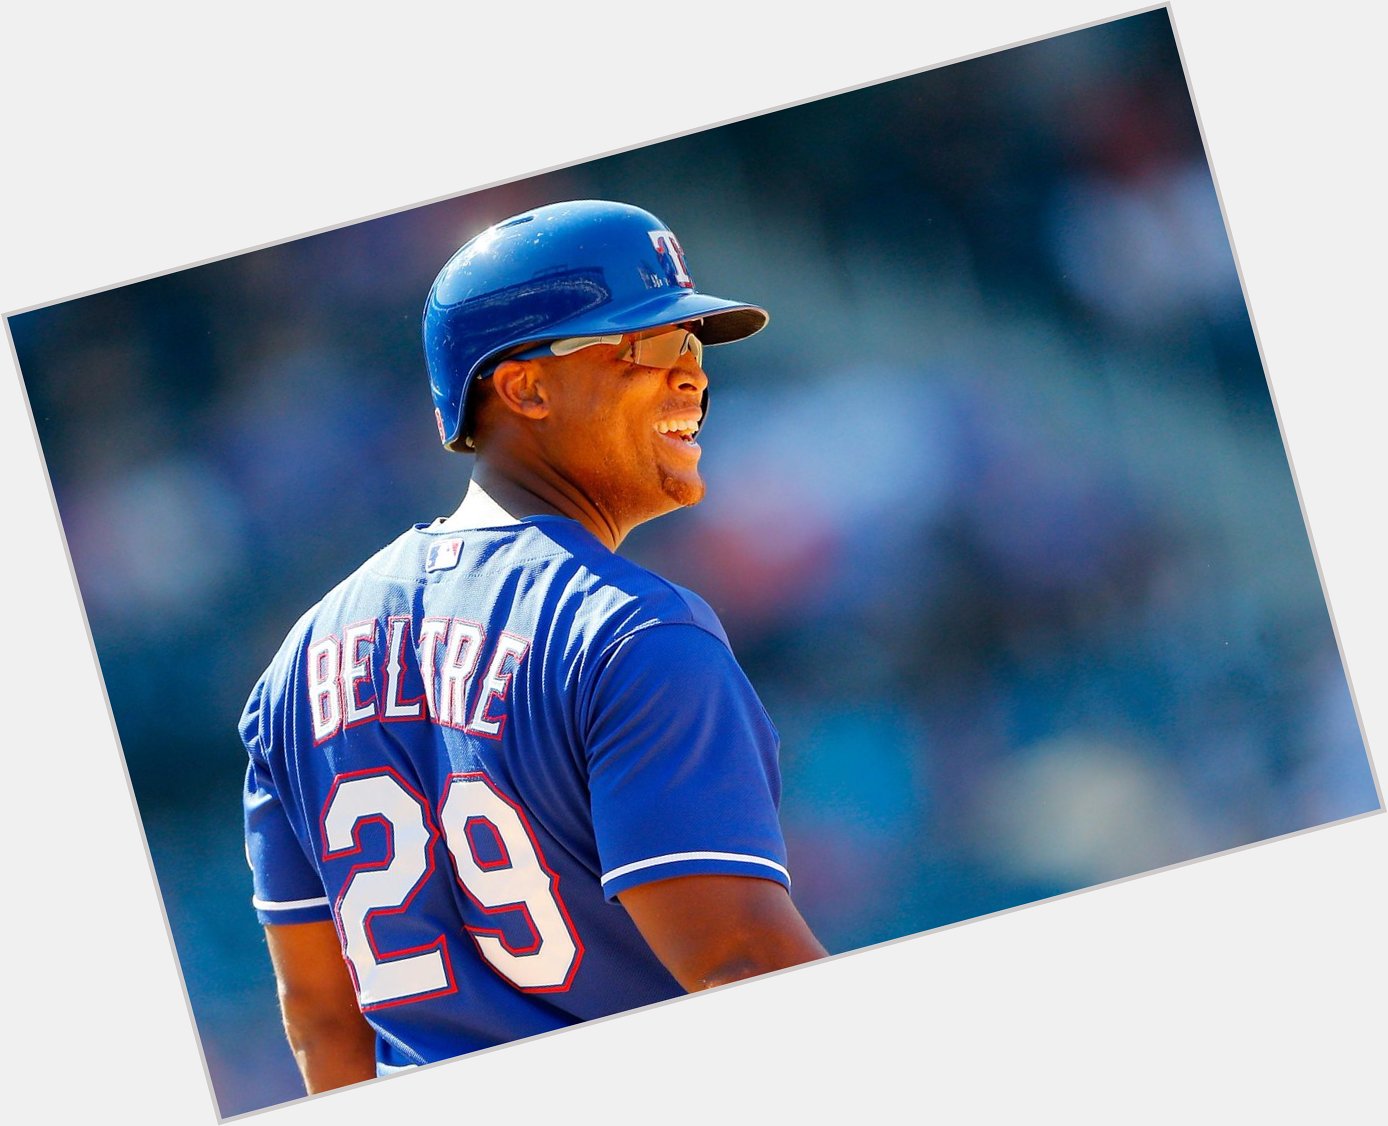 4-time All-Star, 4-time Gold Glove winner. Just don\t touch his head! 

Happy Birthday, Adrian Beltre! 